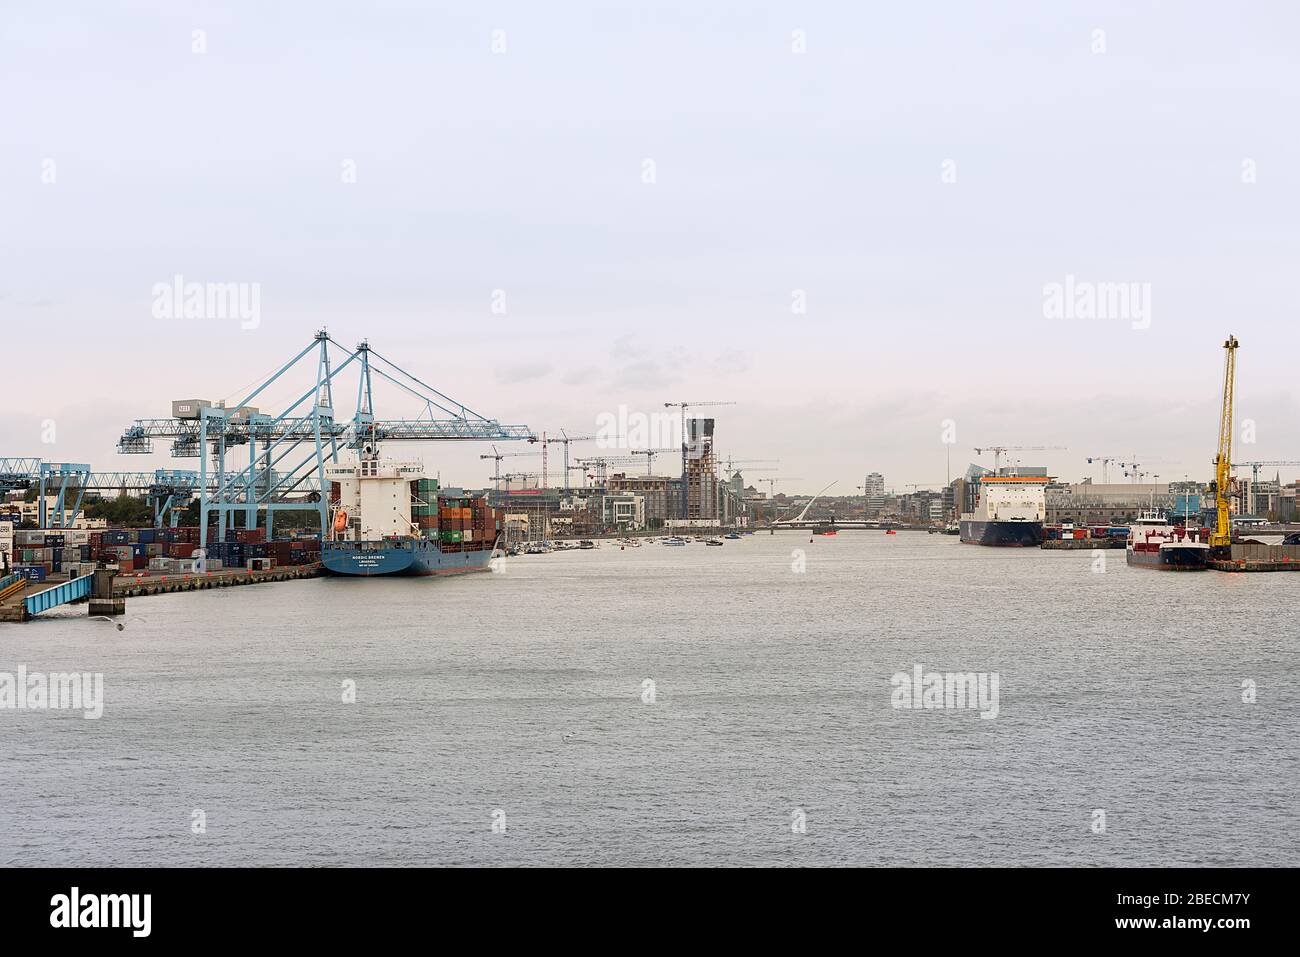 Departing the Dublin port with the city and port in the background. Stock Photo